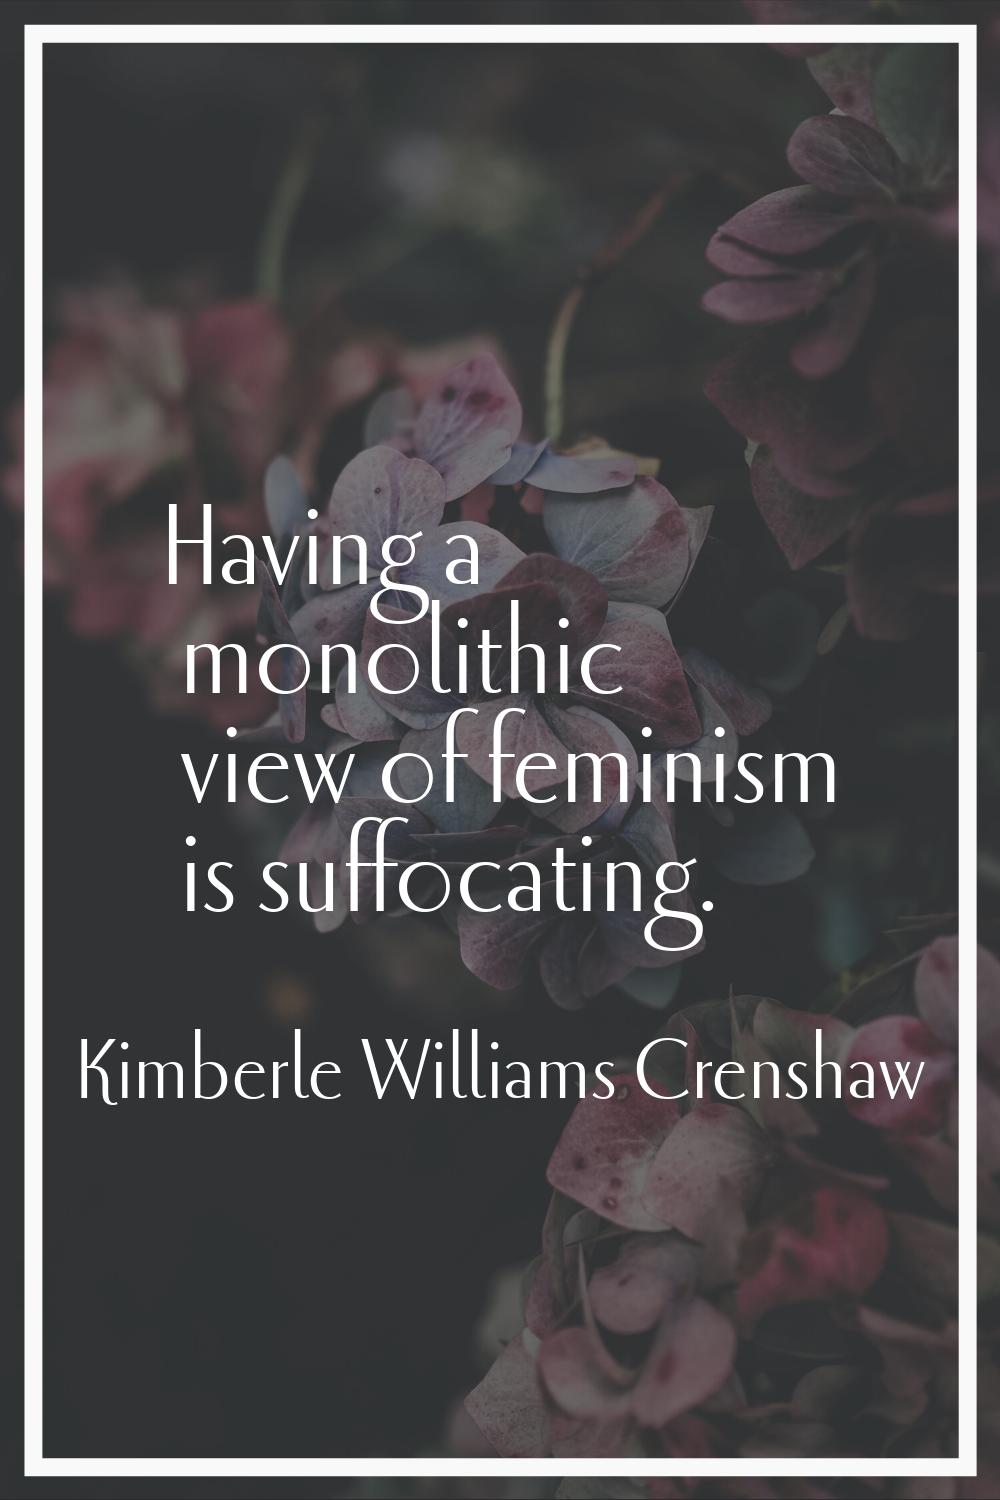 Having a monolithic view of feminism is suffocating.